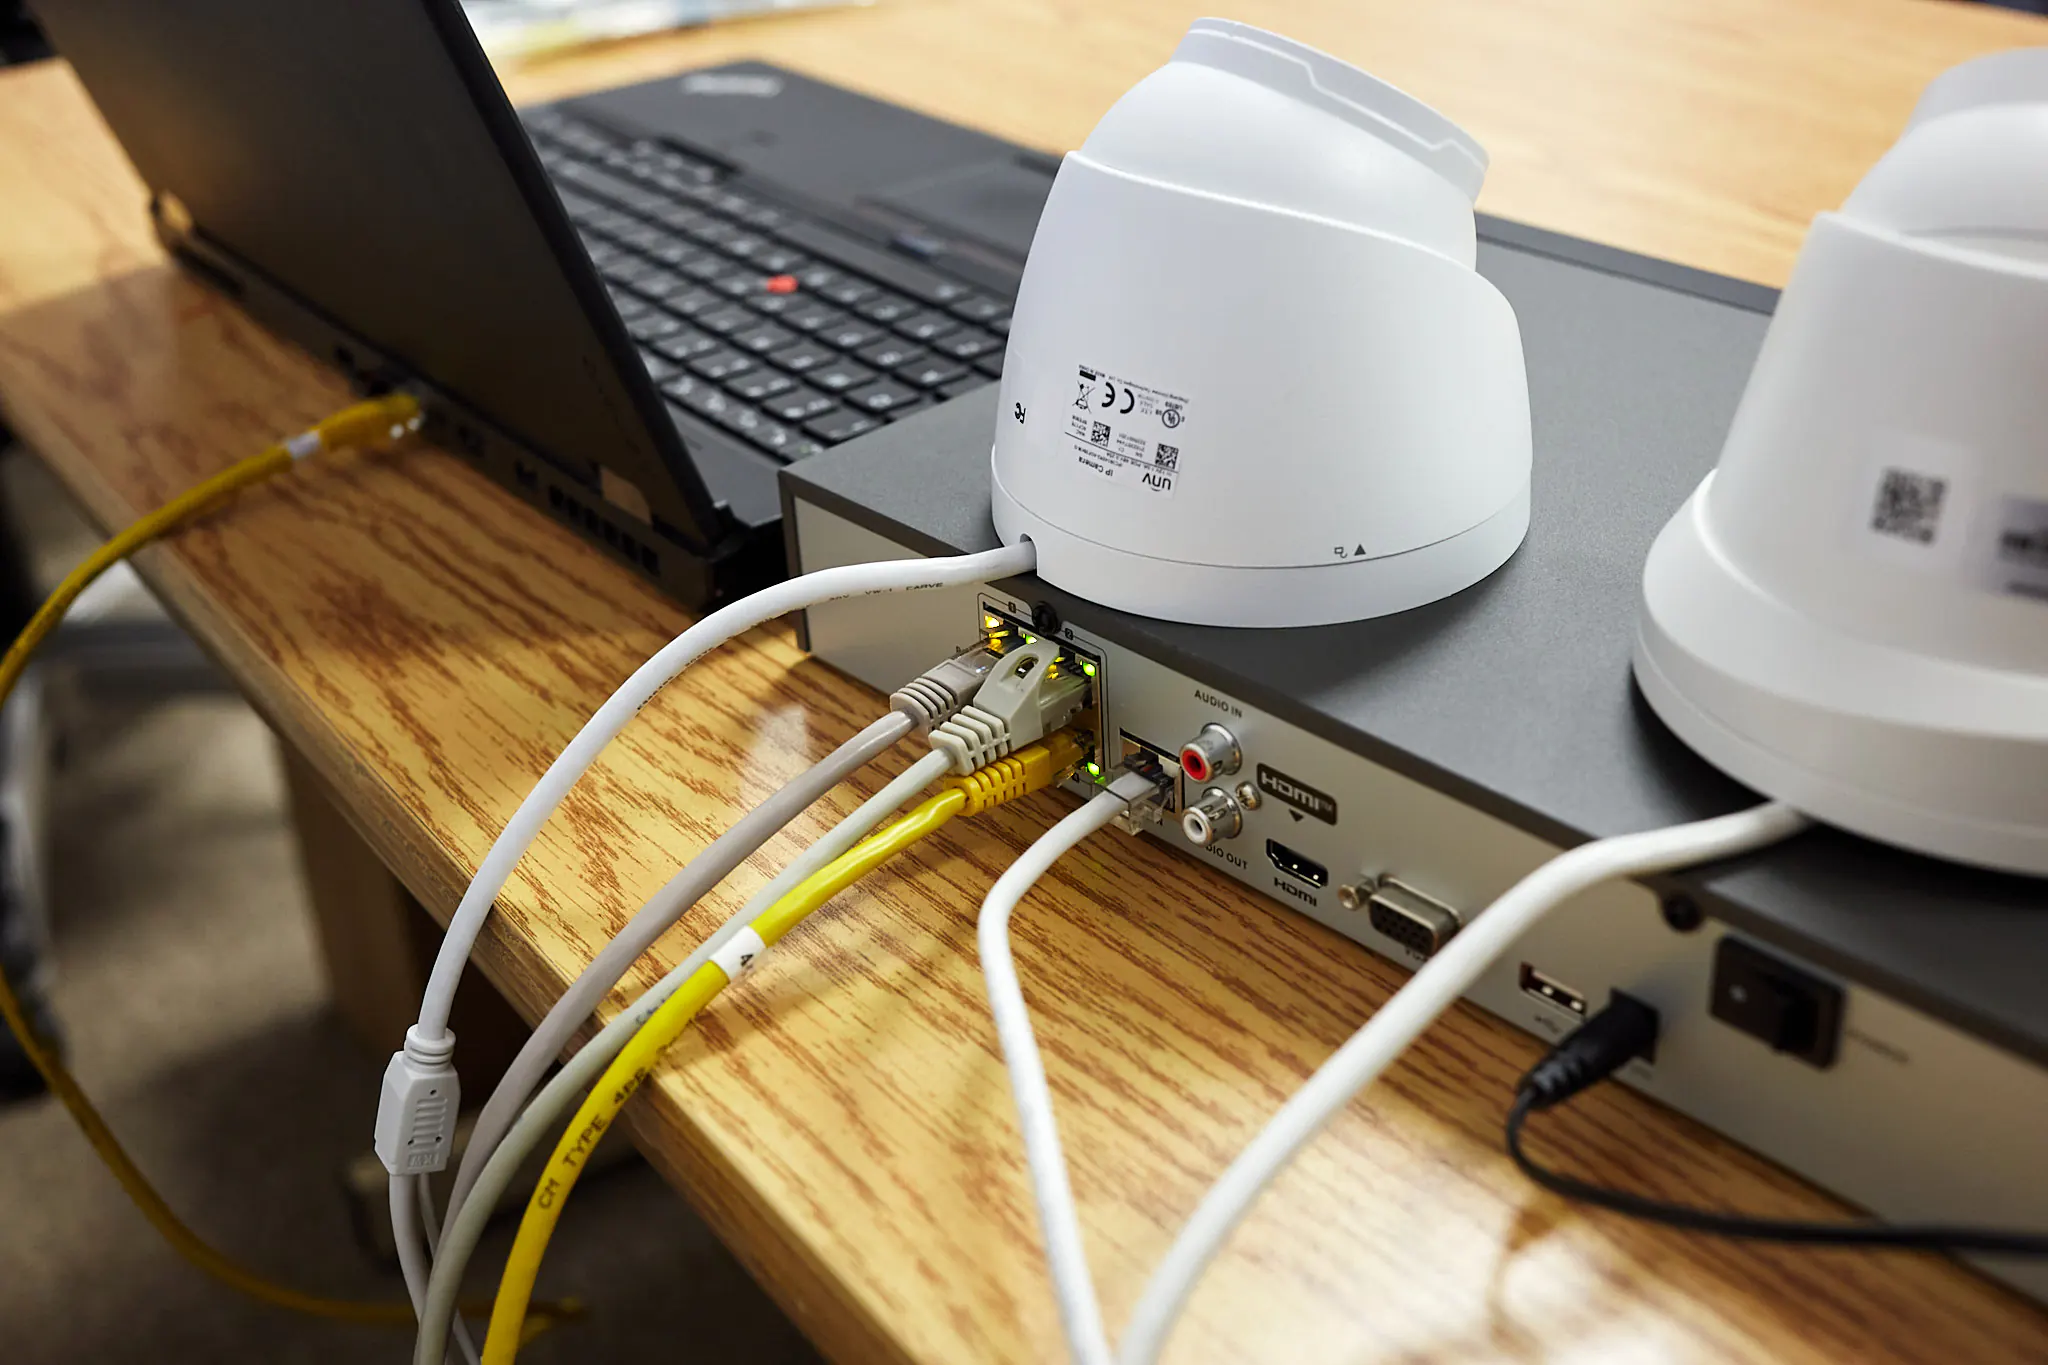 Security cameras plugged into PoE port of NVR